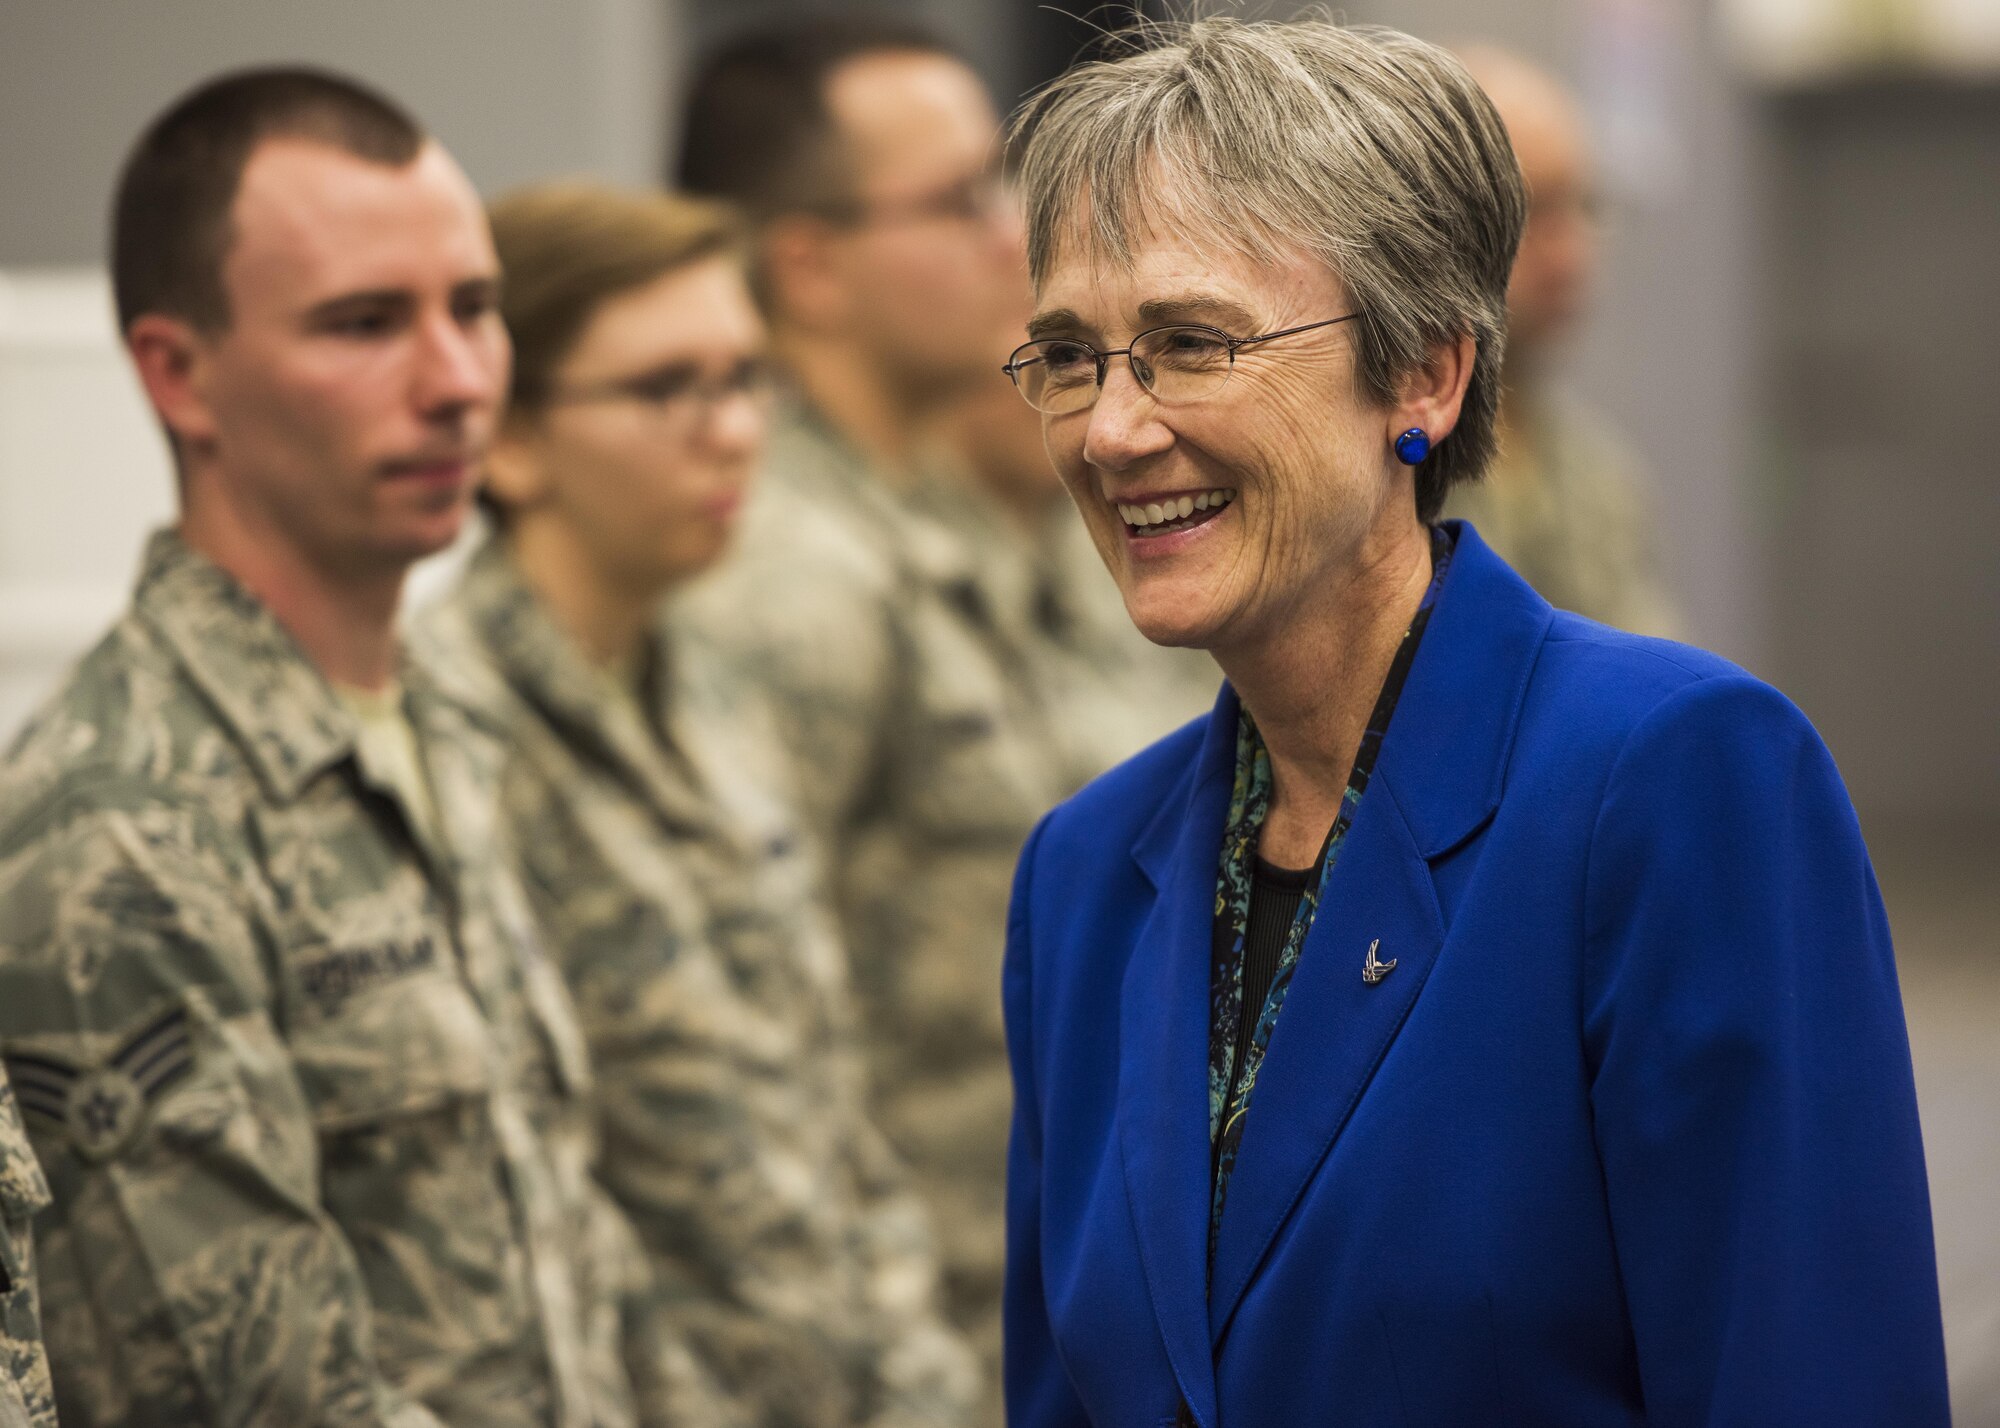 Secretary of the Air Force Heather Wilson speaks with 705th Munitions Squadron Airmen at Minot Air Force Base, N.D., Sept. 7, 2017. During her two-day visit, Wilson toured both 5th Bomb Wing and 91st Missile Wing units and spoke with Airmen emphasizing the importance of the nuclear deterrence mission. (U.S. Air Force photo/Senior Airman J.T. Armstrong)